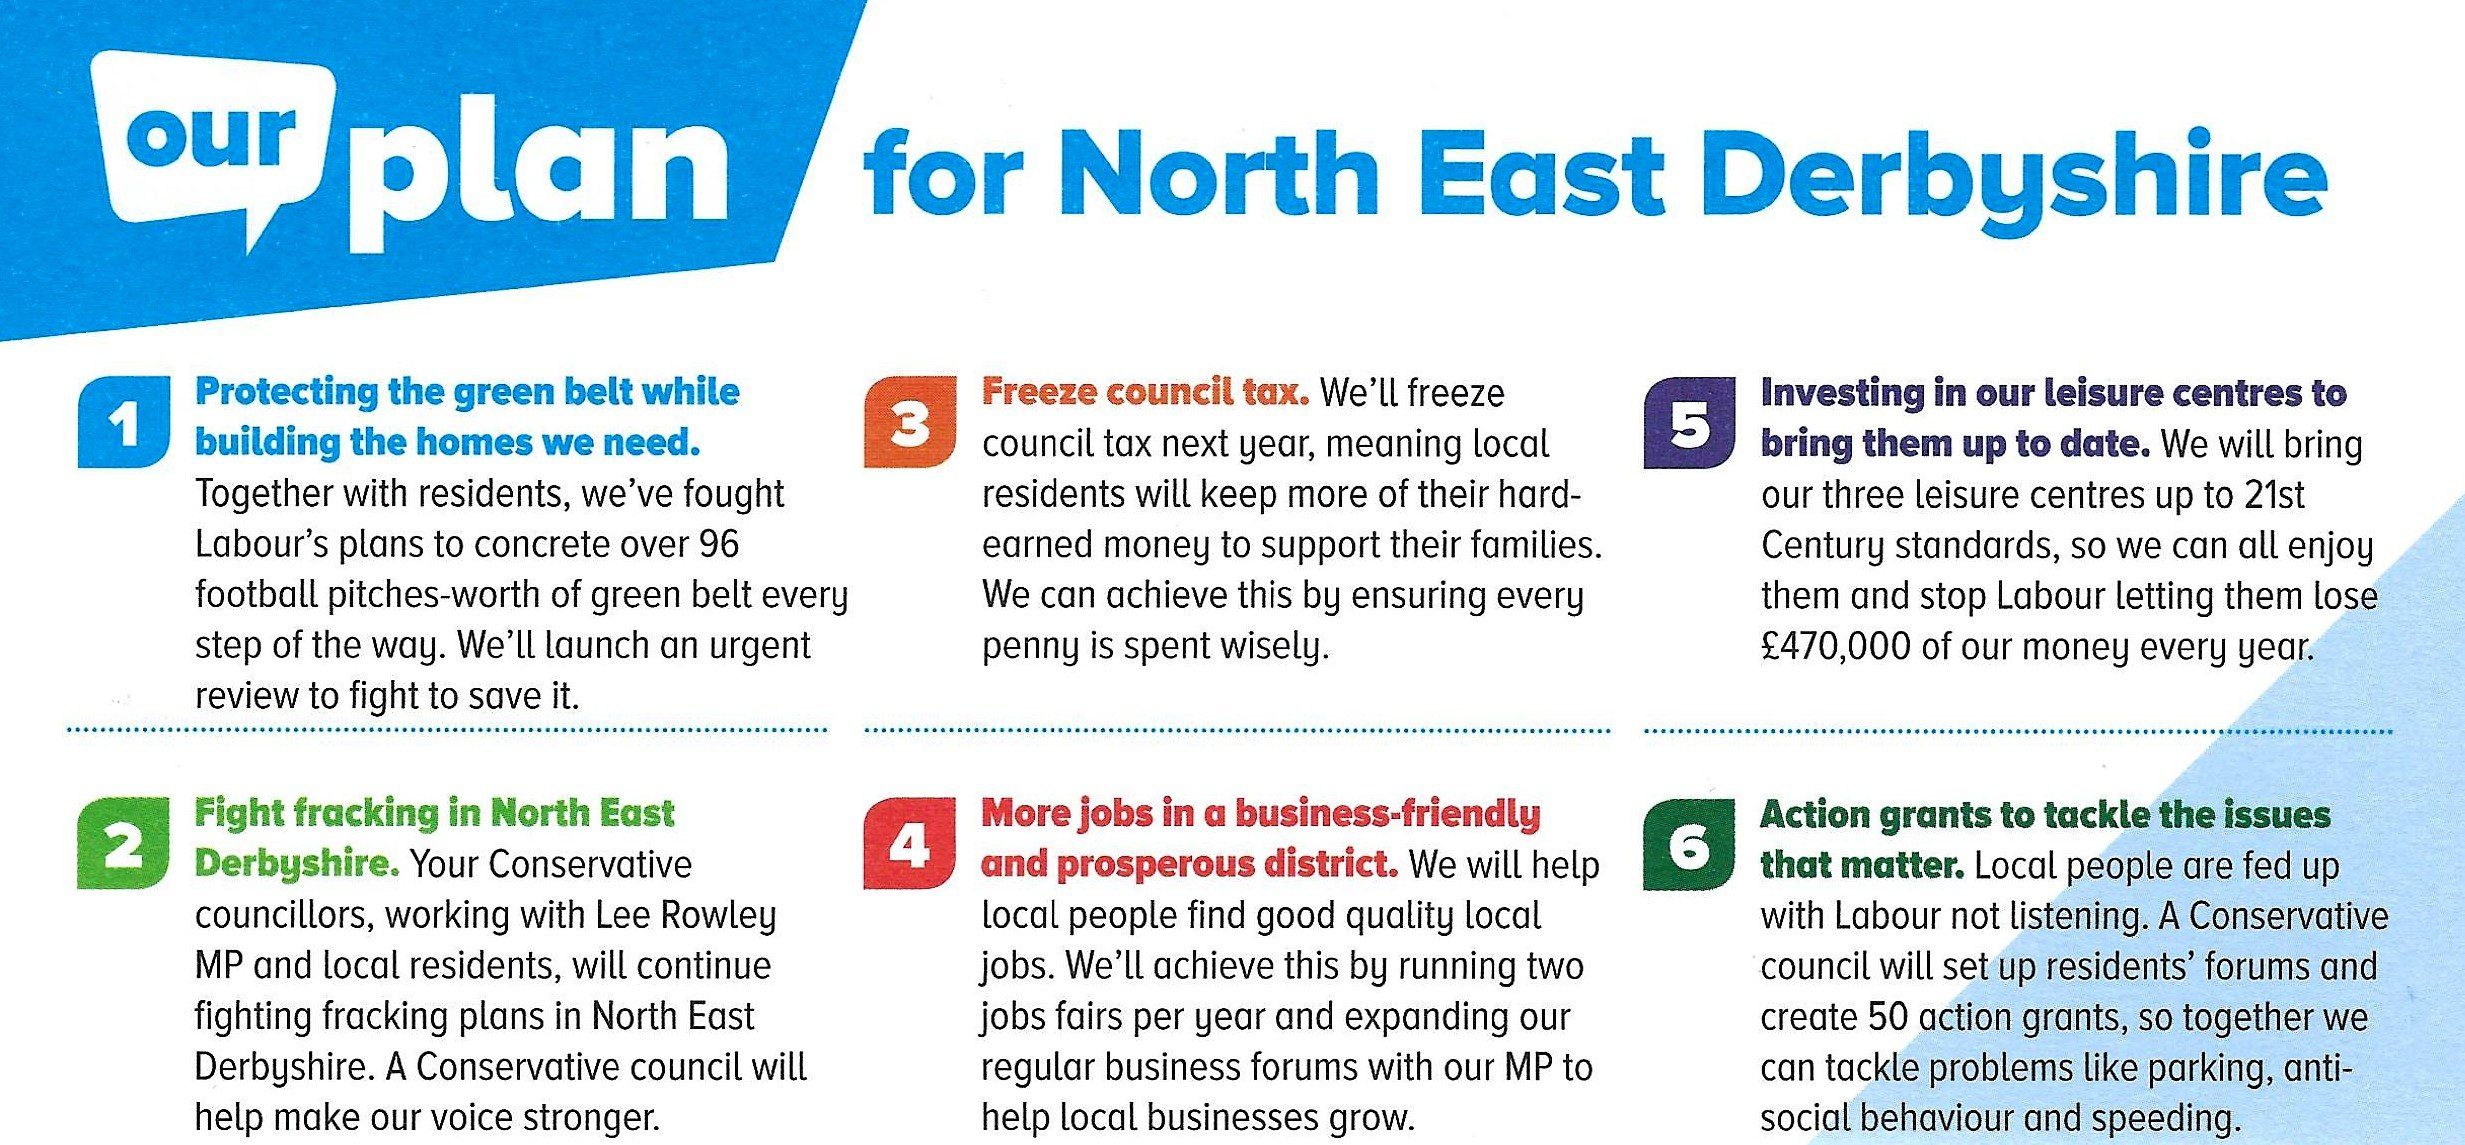 Our Plan for North East Derbyshire